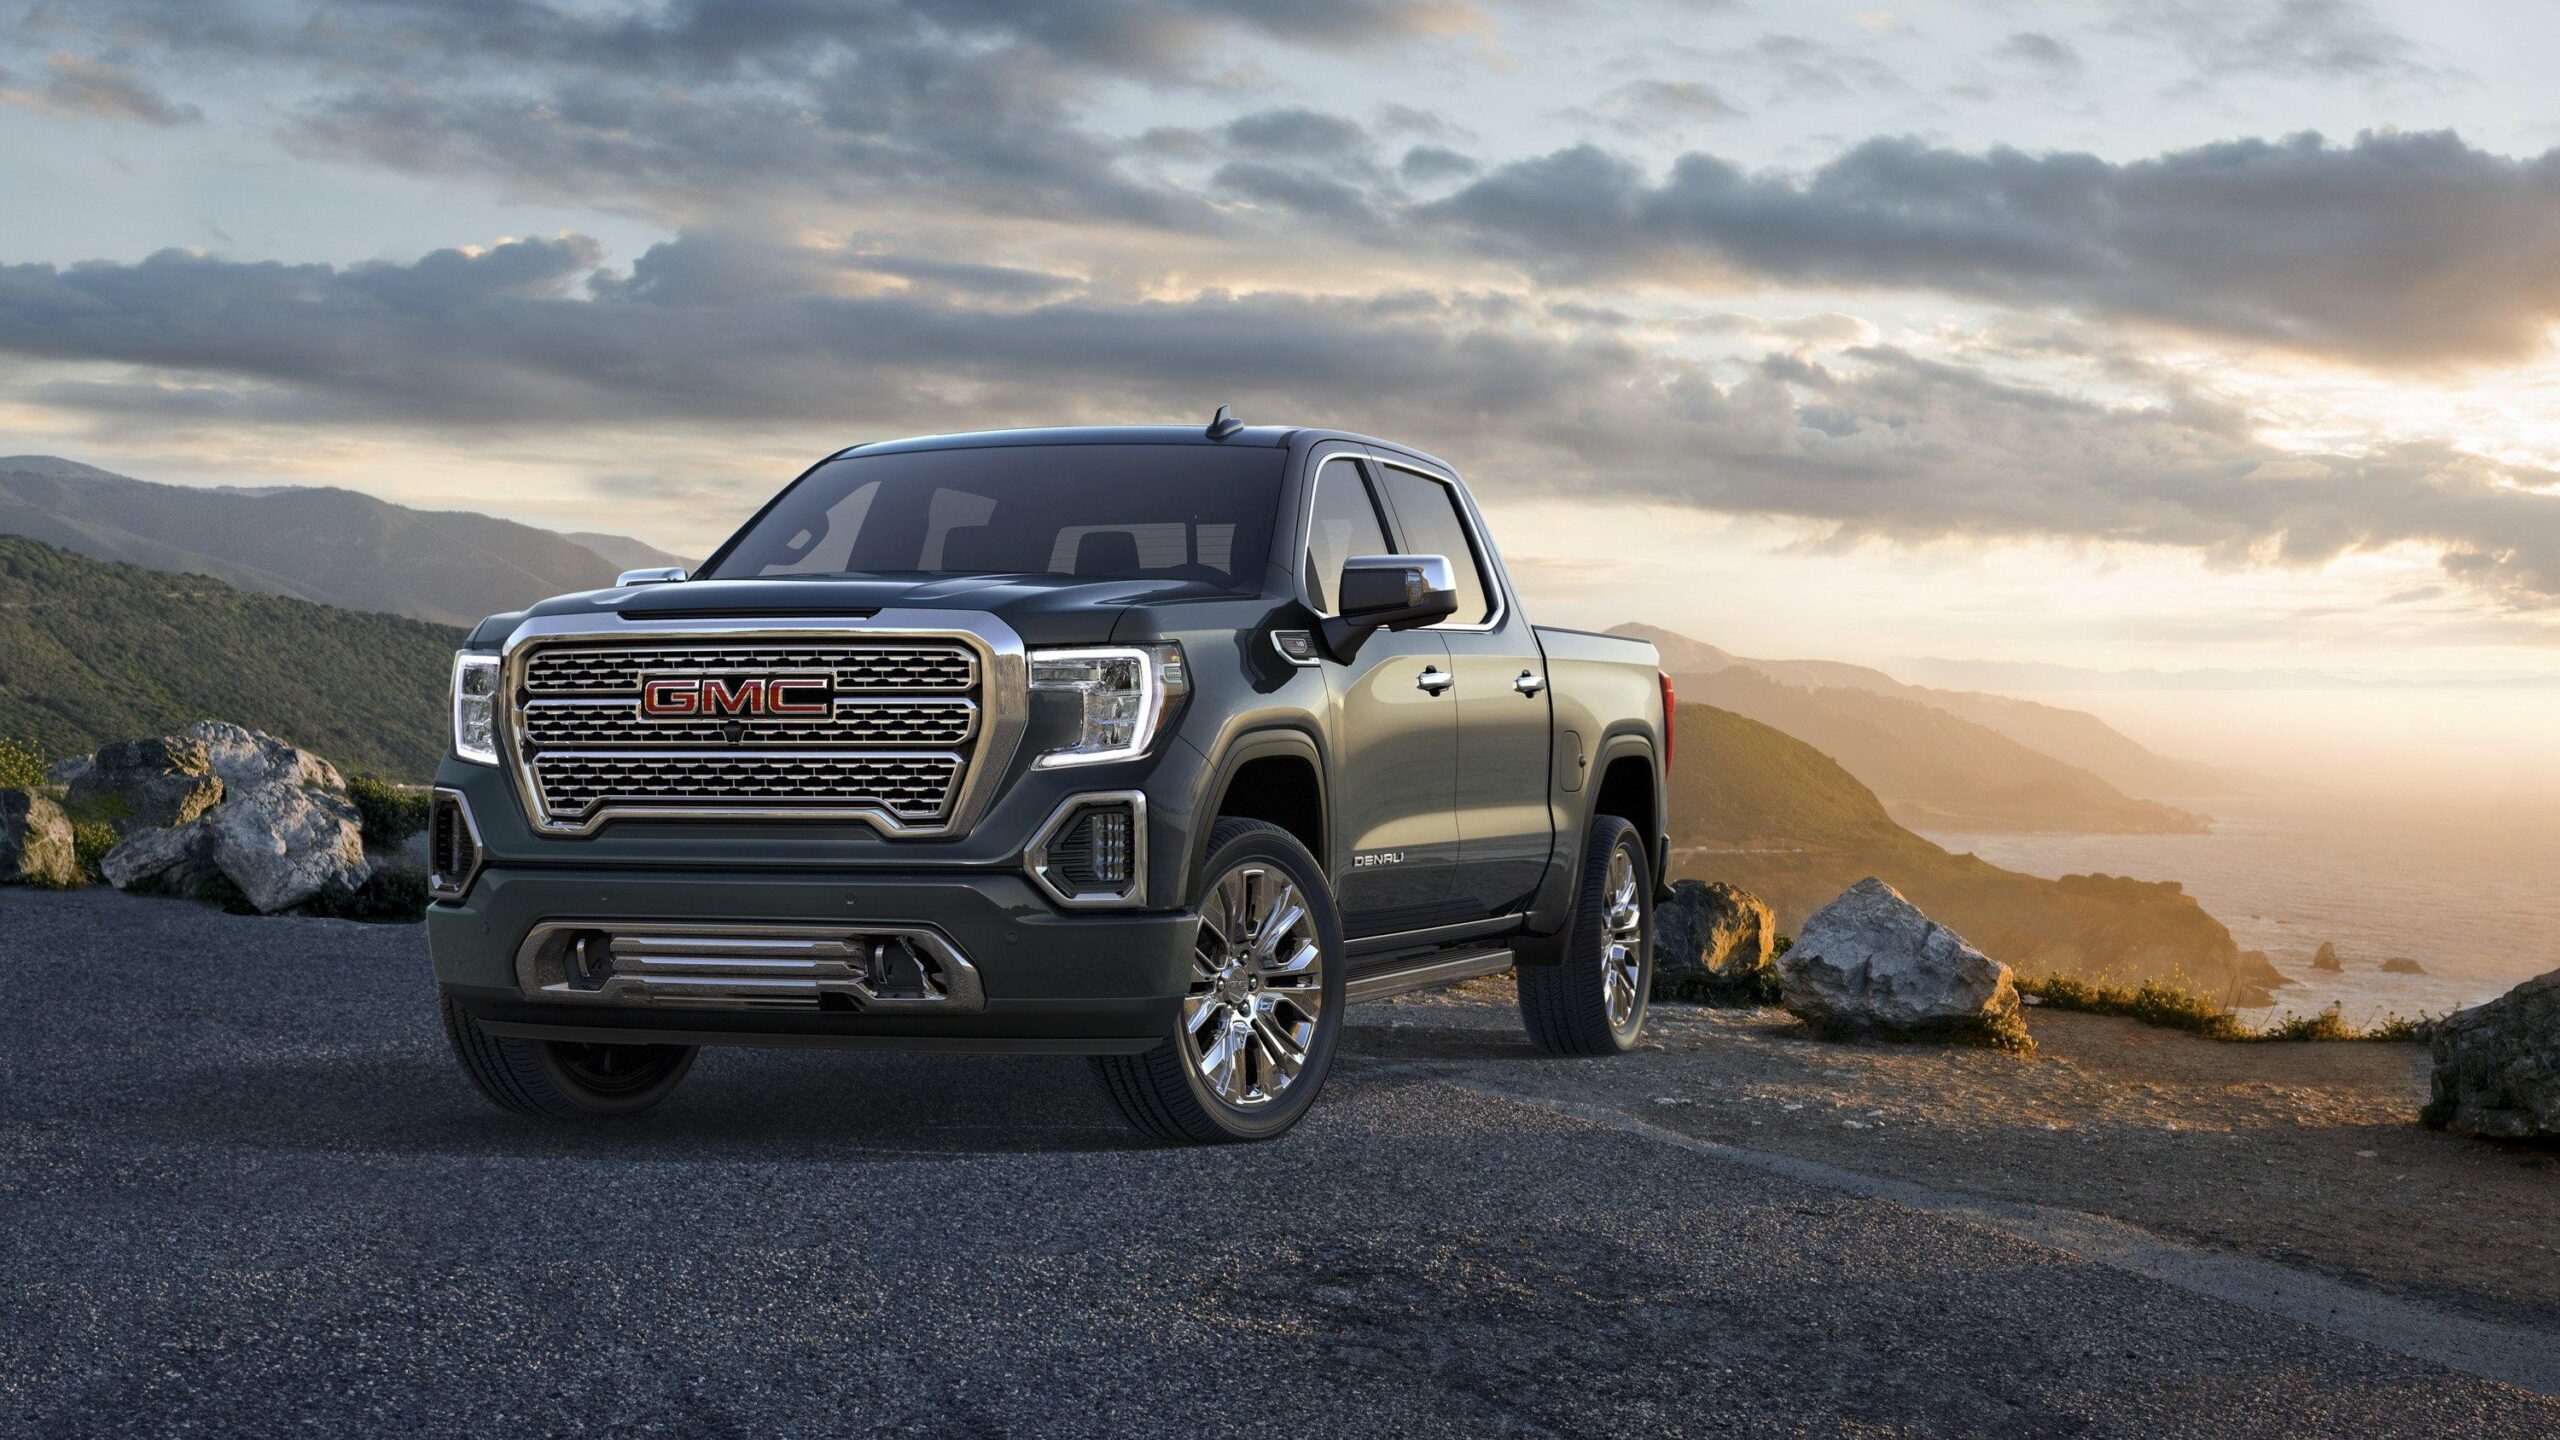 GMC Sierra Pictures, Photos, Wallpapers